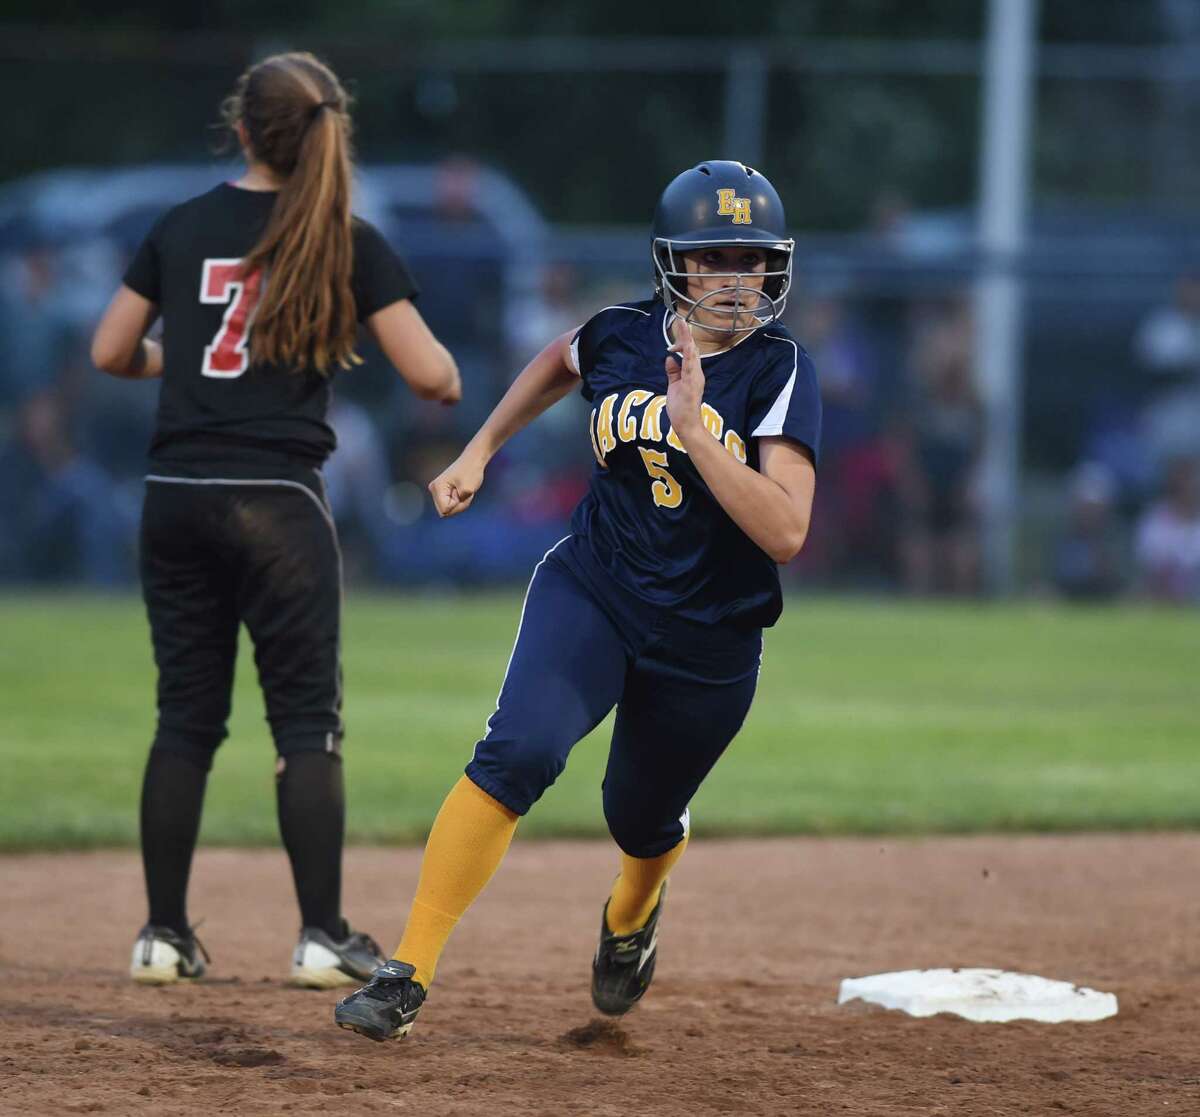 Alyssa Barcomb runs for third during East Haven’d Class L State Softball Championship on 6/12/2015. Photo by Arnold Gold/New Haven Register